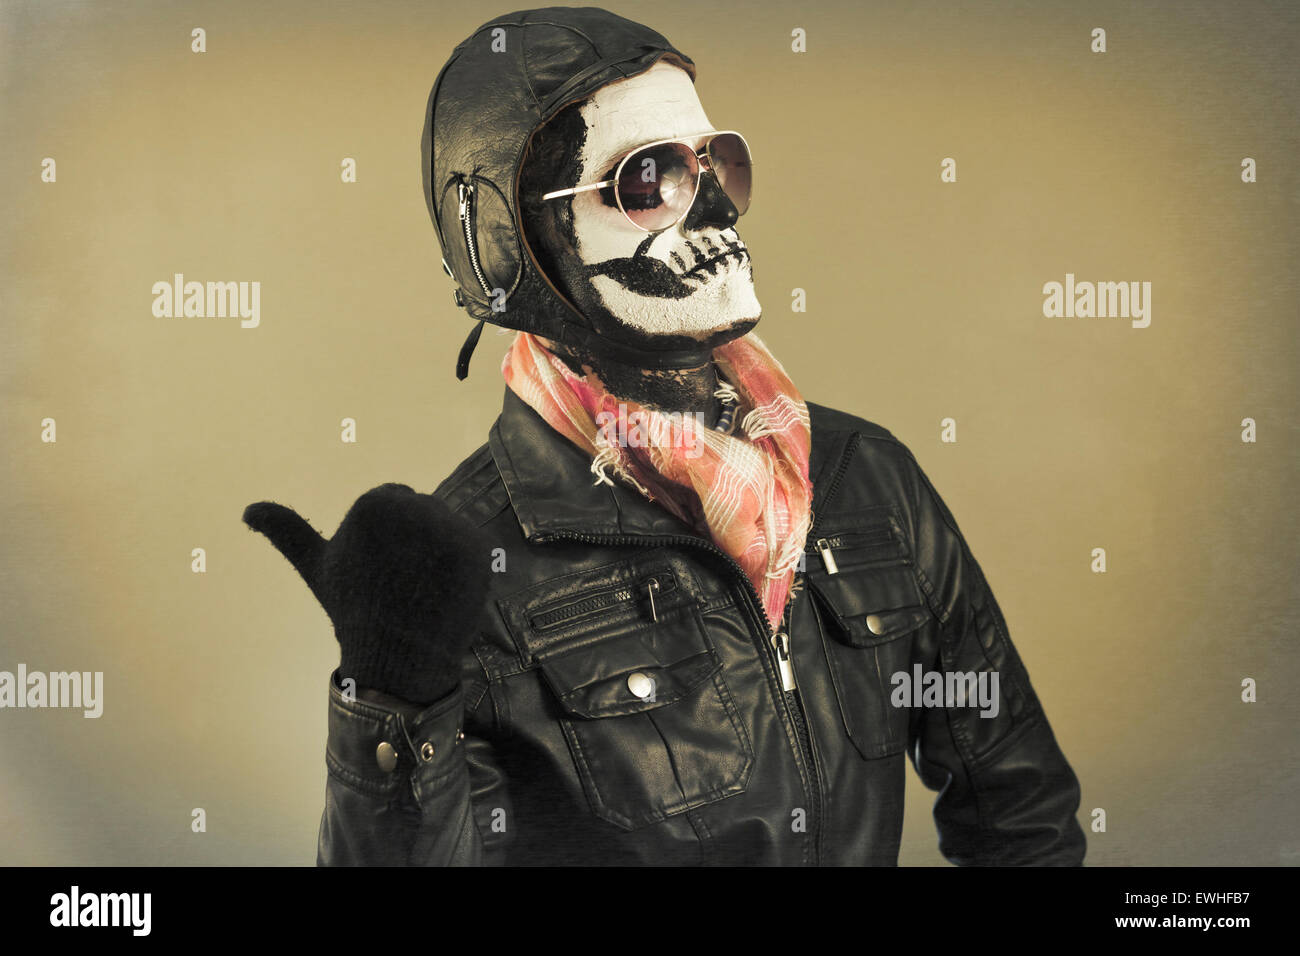 Blaming aviator with face painted as human skull Stock Photo